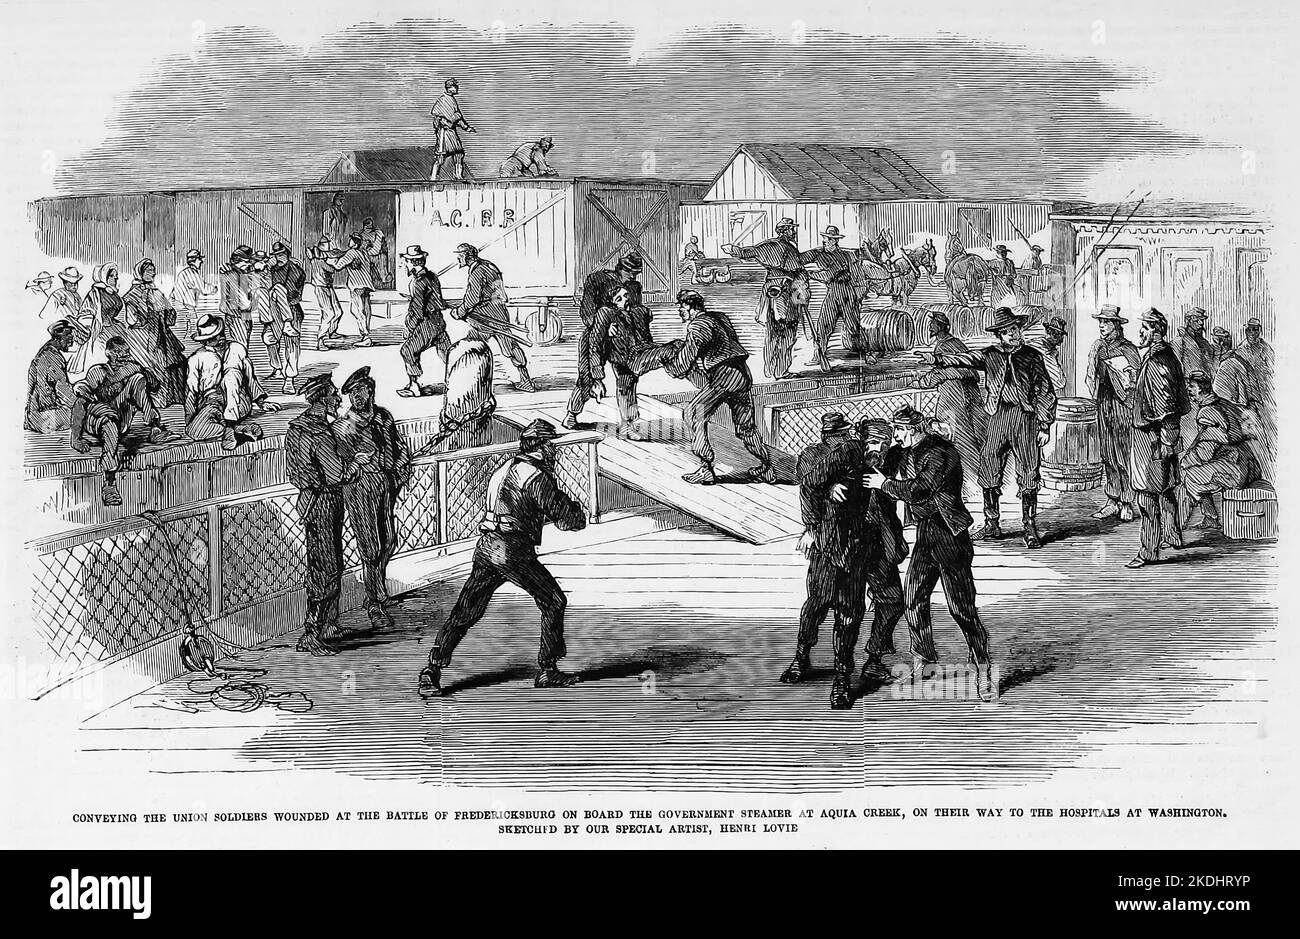 Conveying the Union soldiers wounded at the Battle of Fredericksburg on board the government steamer at Aquia Creek, on their way to the hospitals at Washington, D. C. December 1862. 19th century American Civil War illustration from Frank Leslie's Illustrated Newspaper Stock Photo